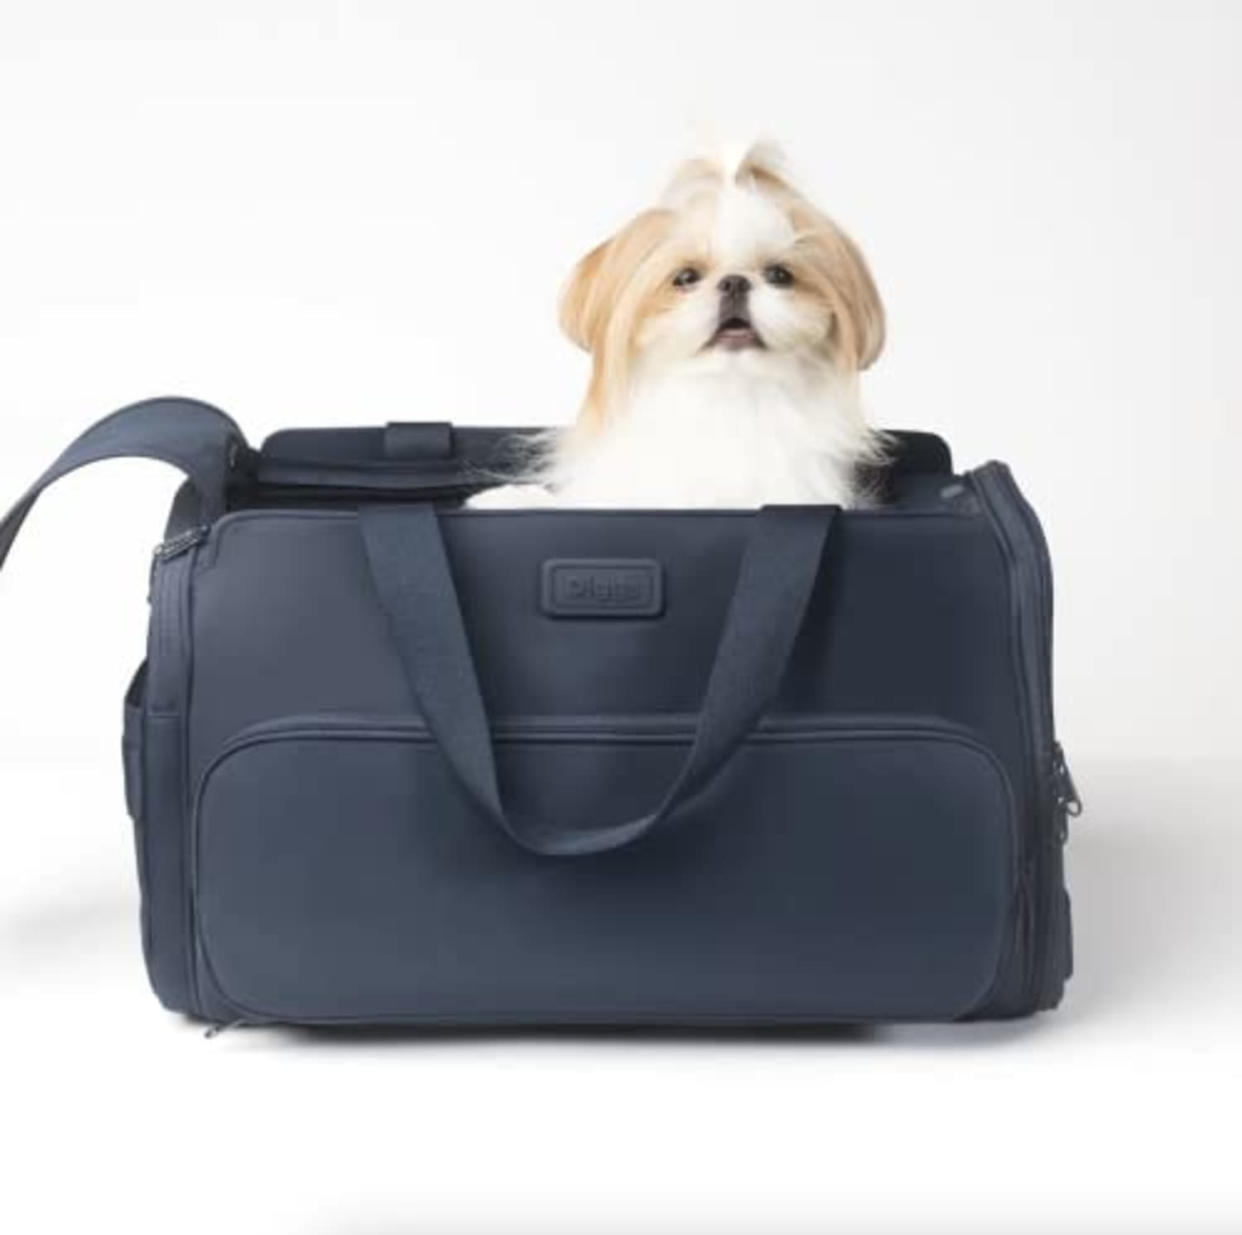 Diggs Travel Pet Carrier for Small Dogs and Cats, Plane, Train, or Car, with Shoulder Strap (Navy) (AMAZON)